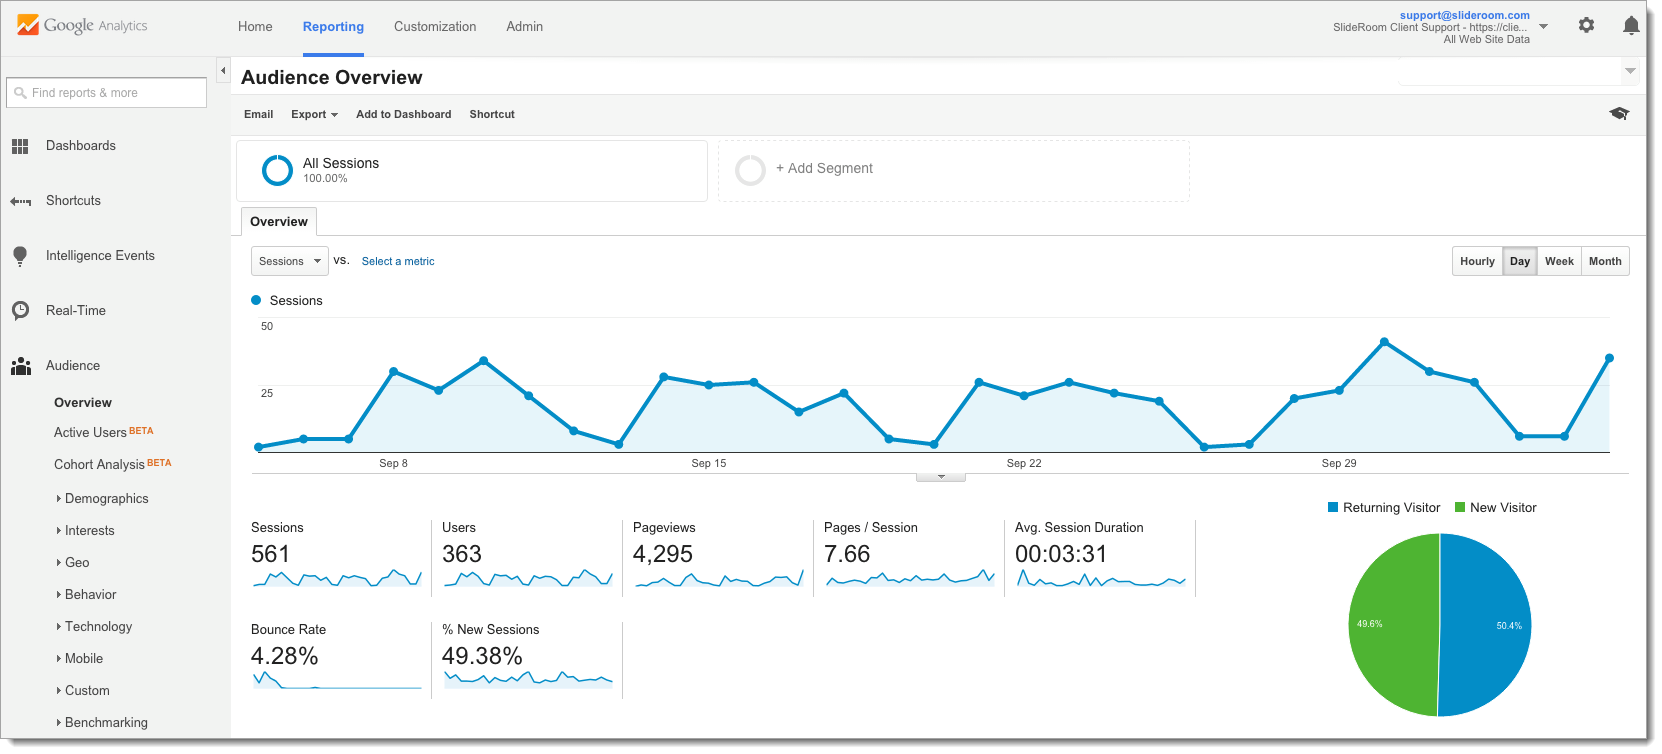 Google Analytics dashboard with charts and graphs of data